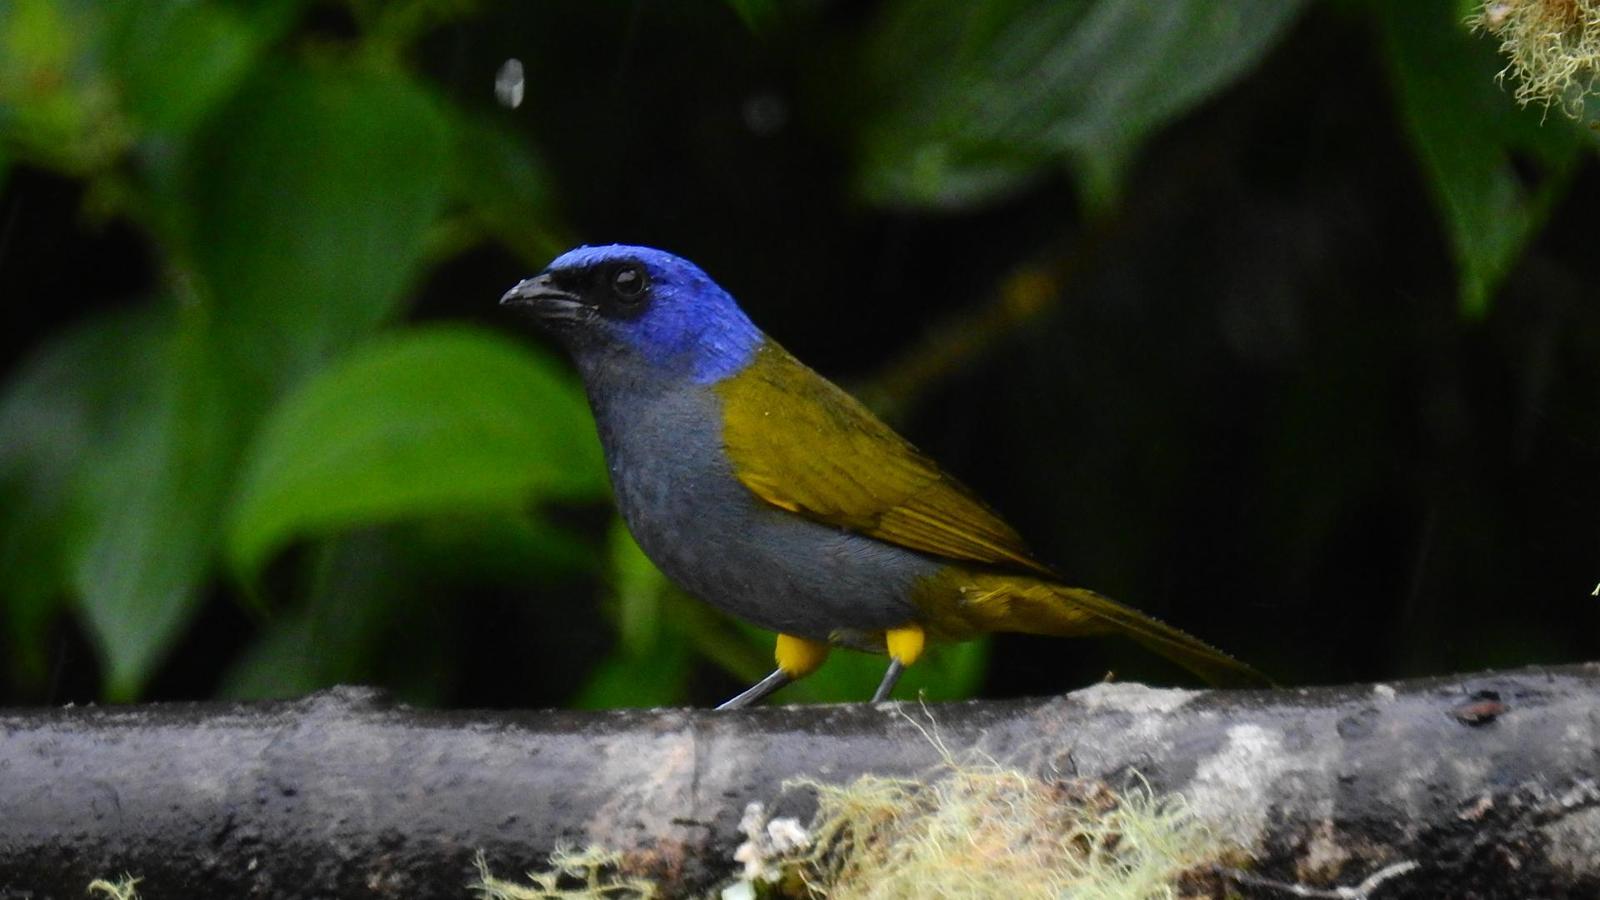 Blue-capped Tanager Photo by Julio Delgado